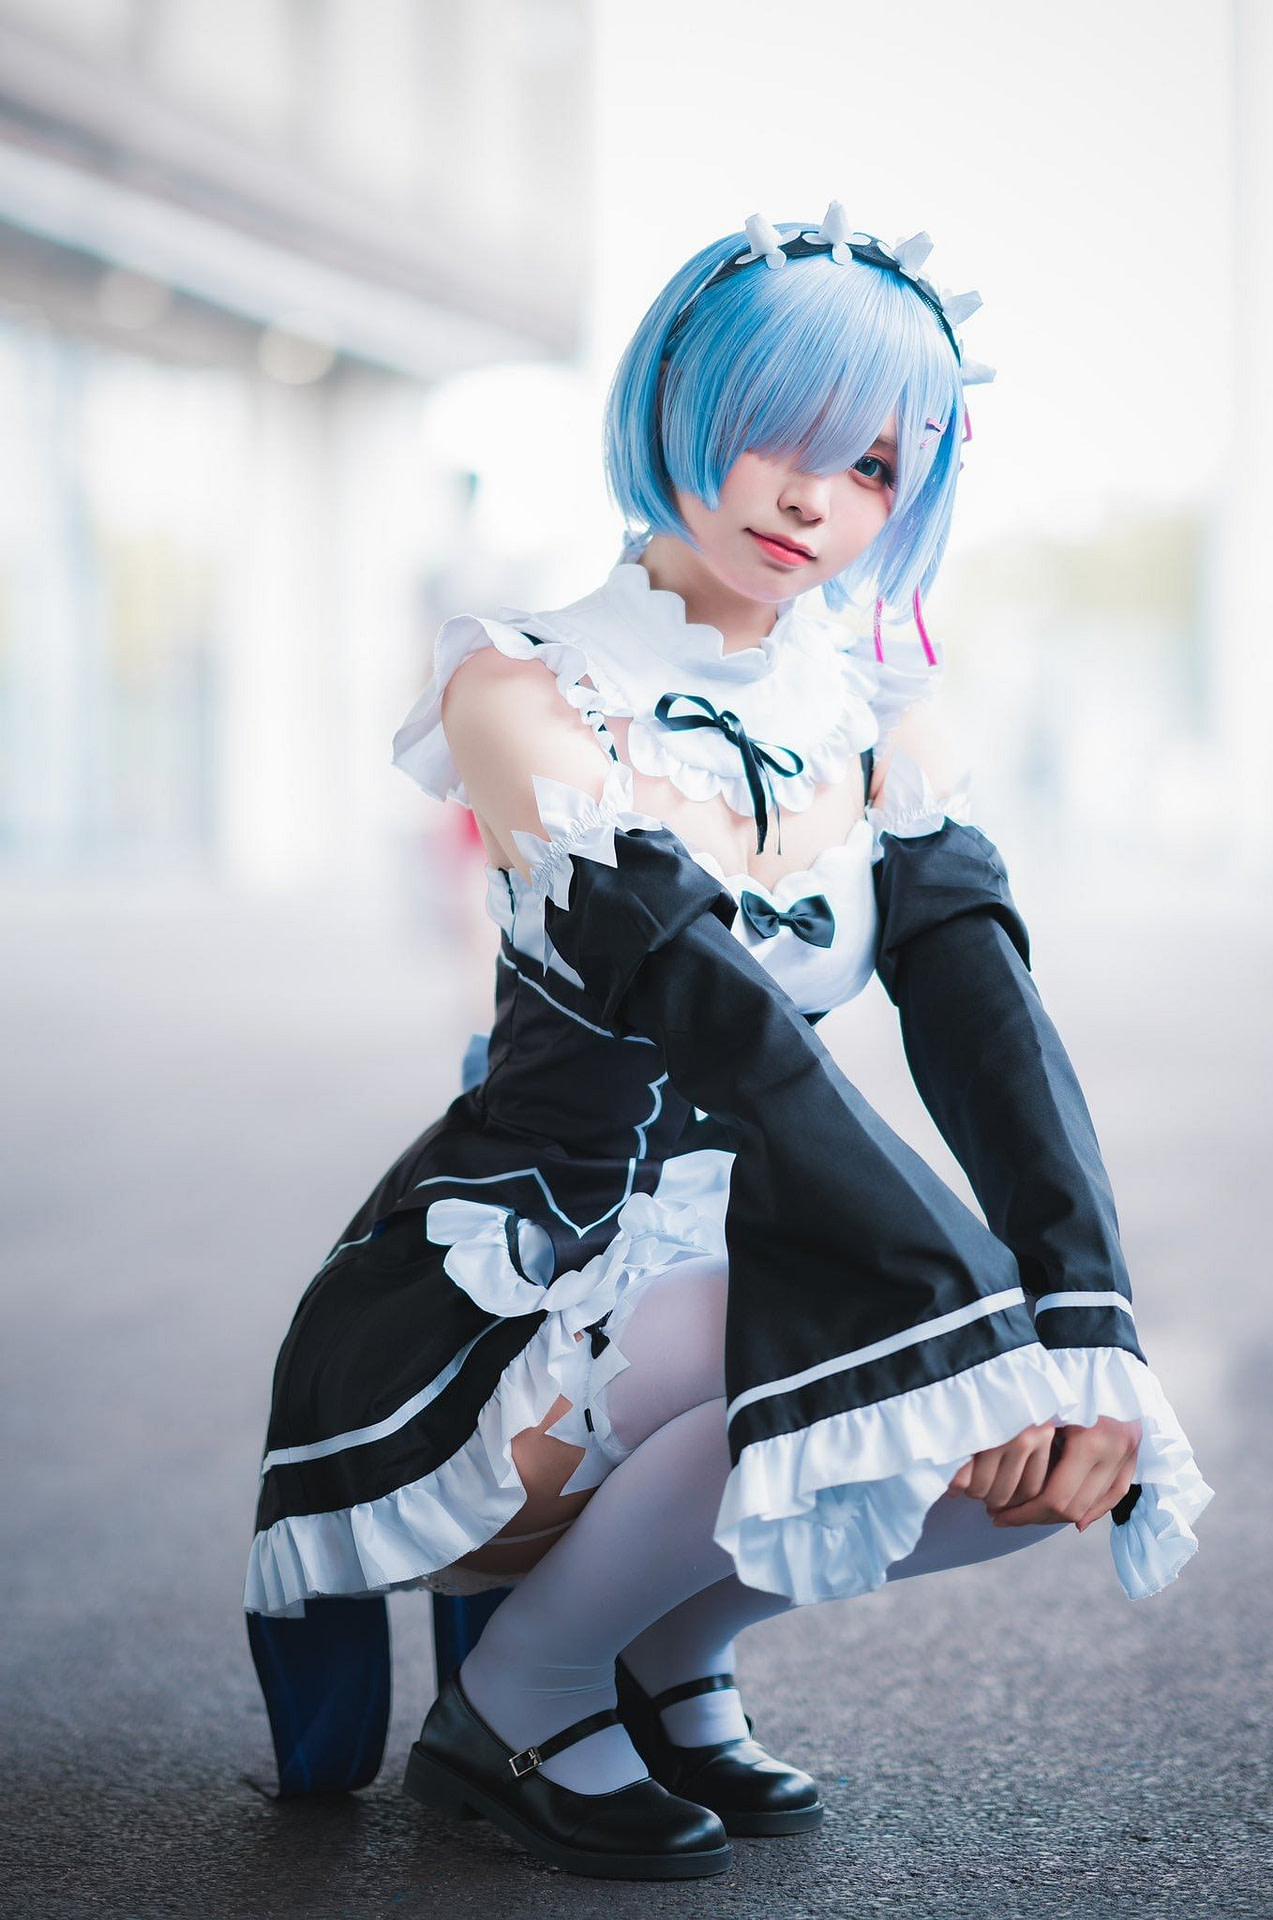 Rem Cosplay from Re : Zero by Asherino on DeviantArt